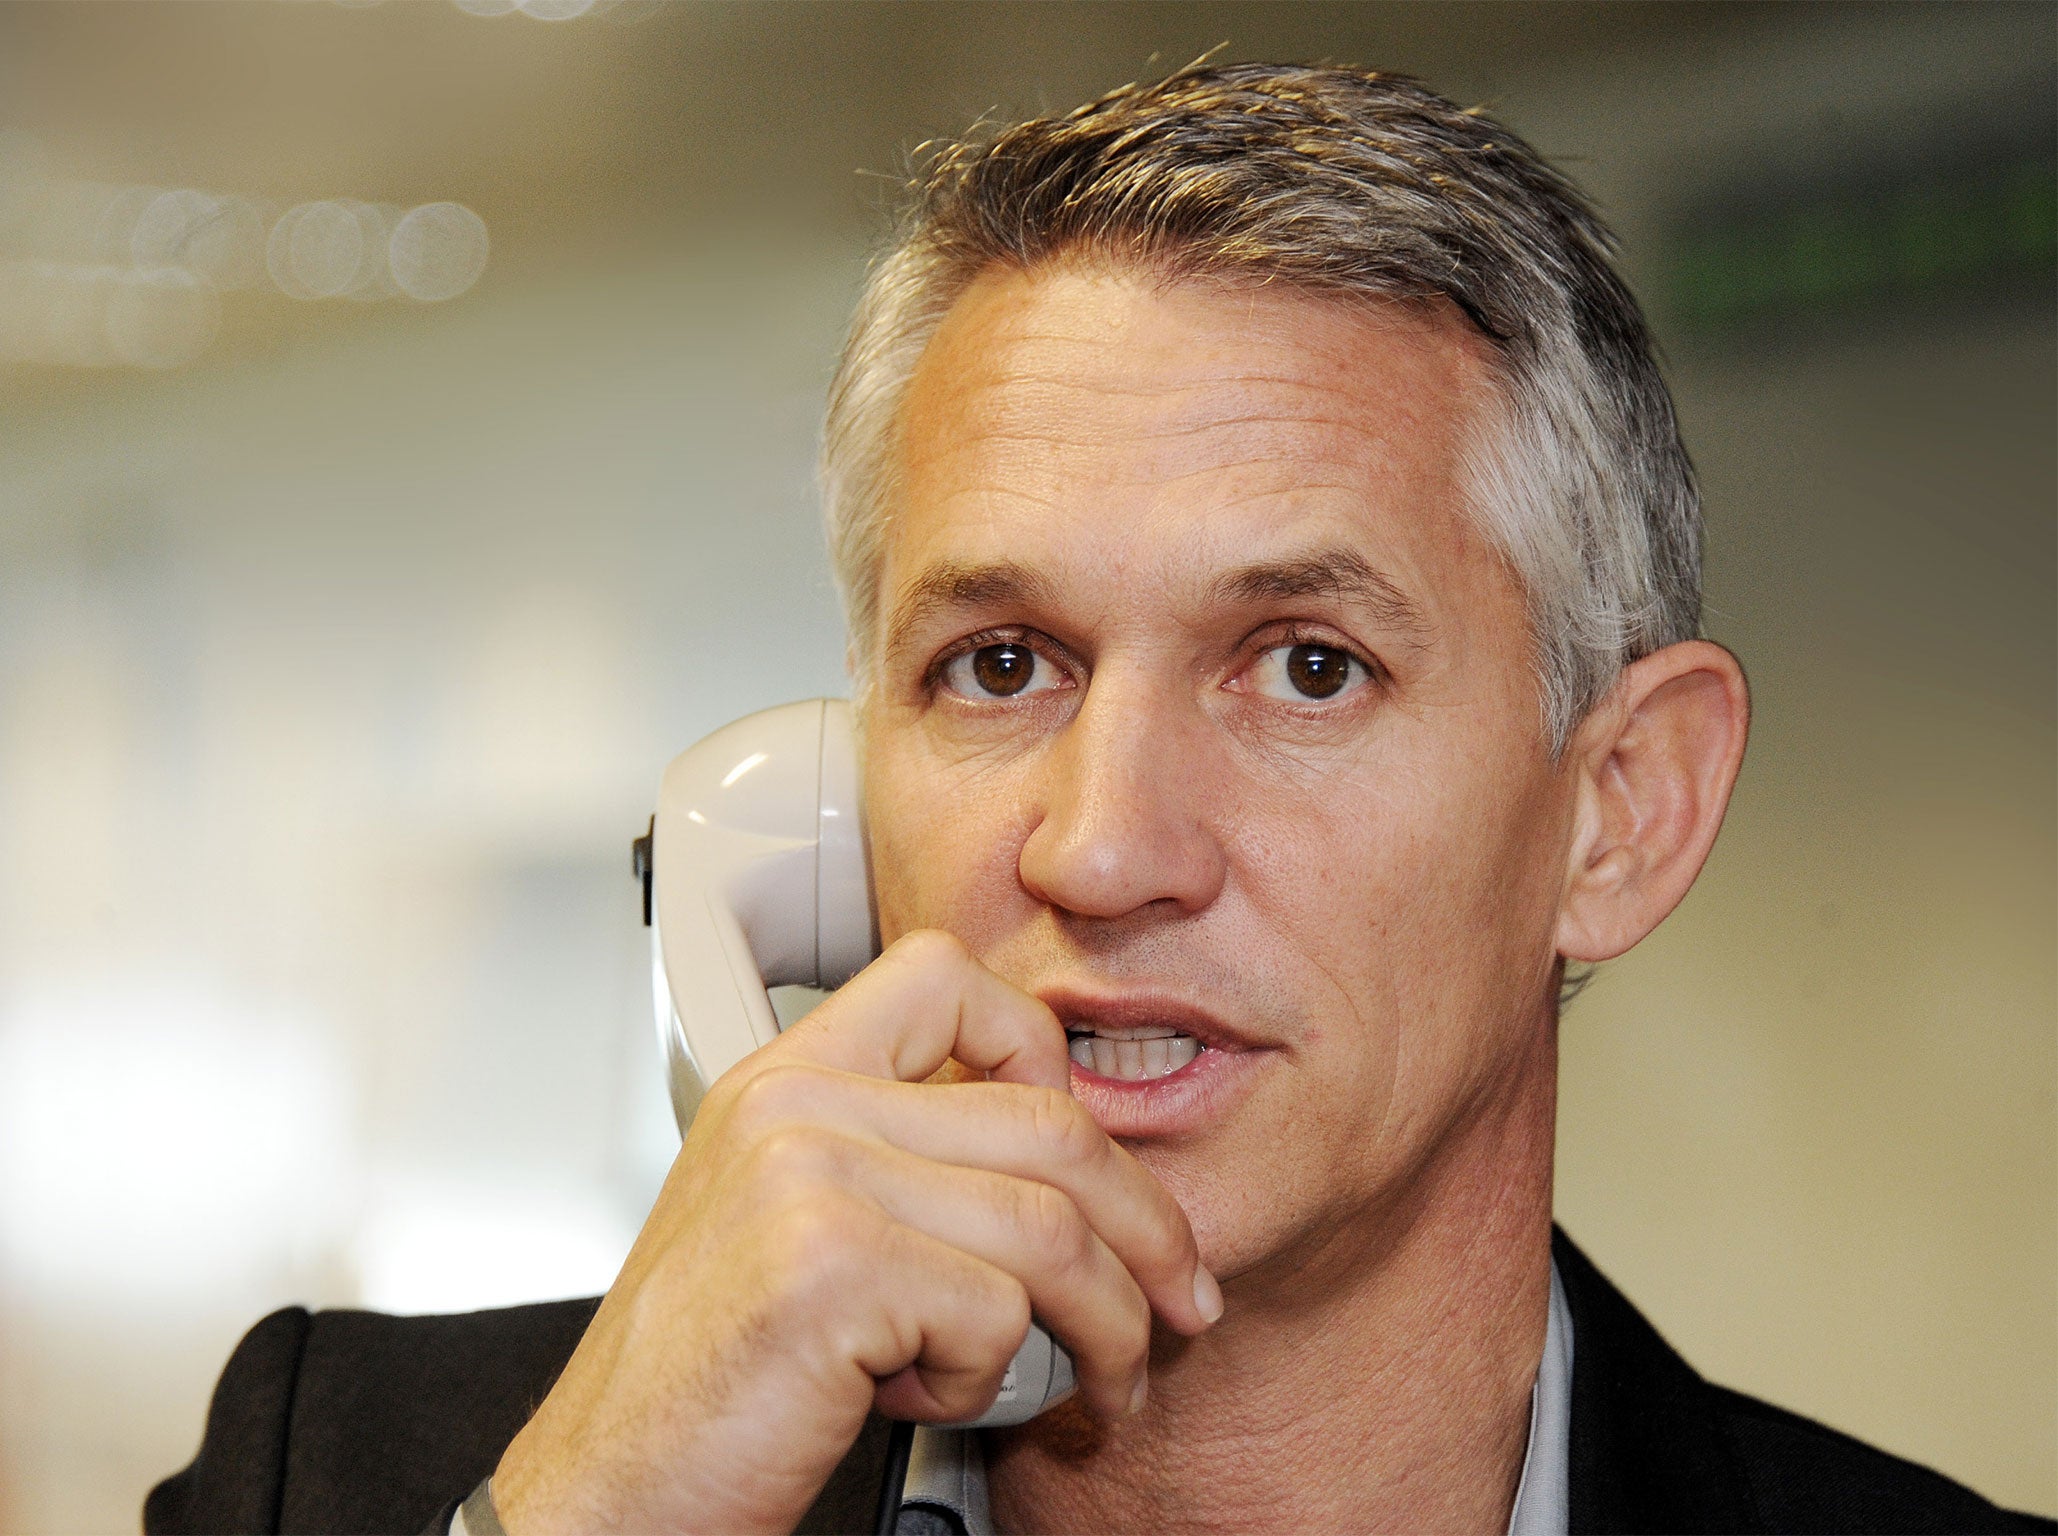 Even in his advancing years, Lineker has preserved a boyish handsomeness